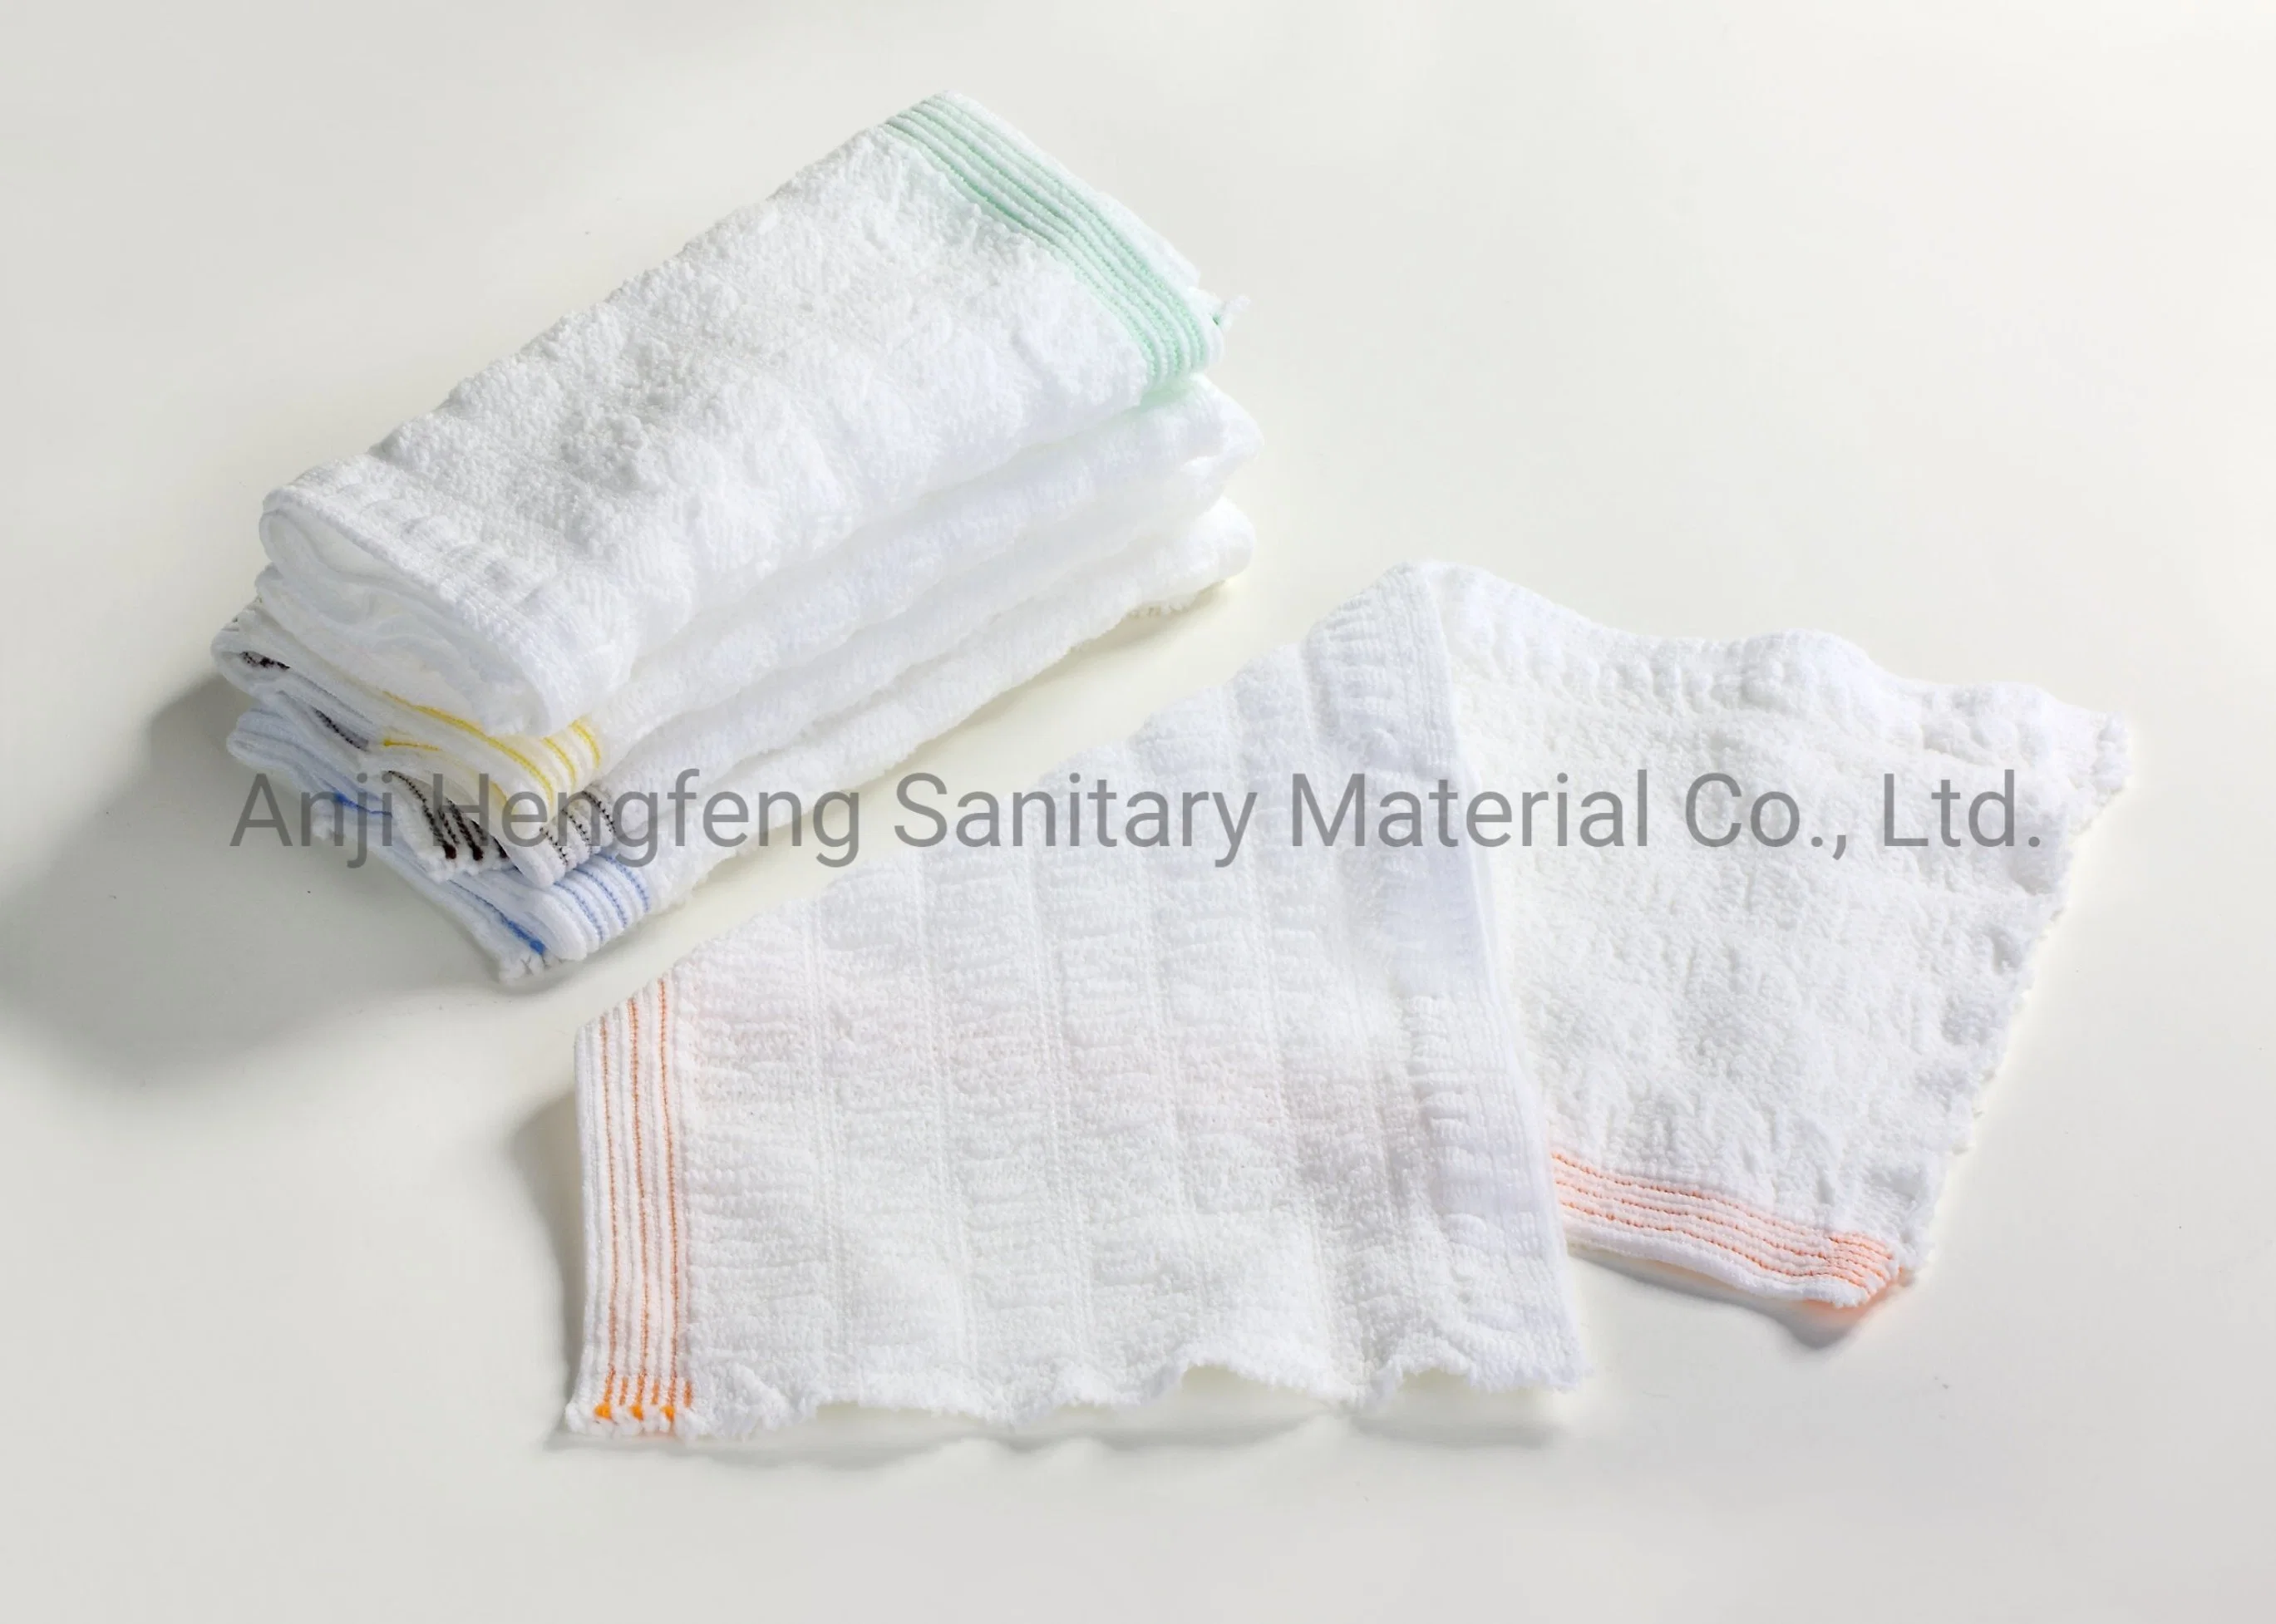 Disposable Brief Disposable Cotton Underwear/Underpants for Men and Women Different Sizes